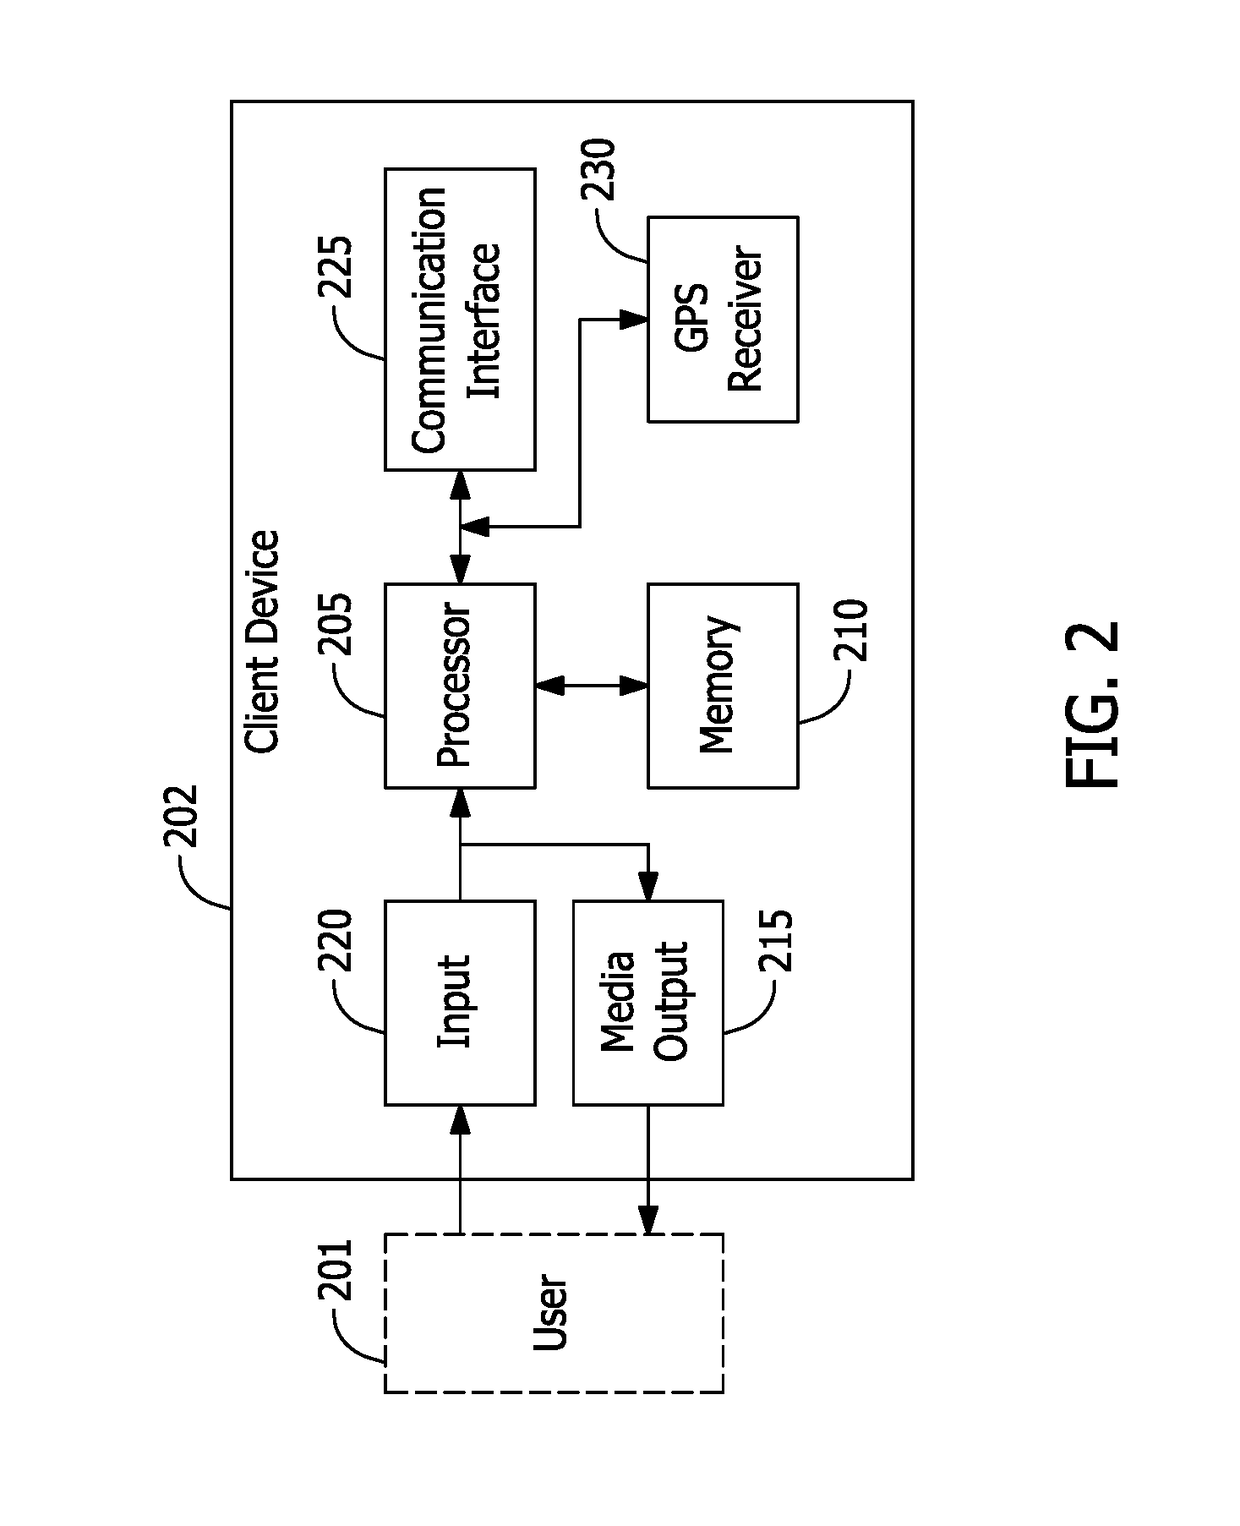 Systems and methods for two-factor location-based device verification